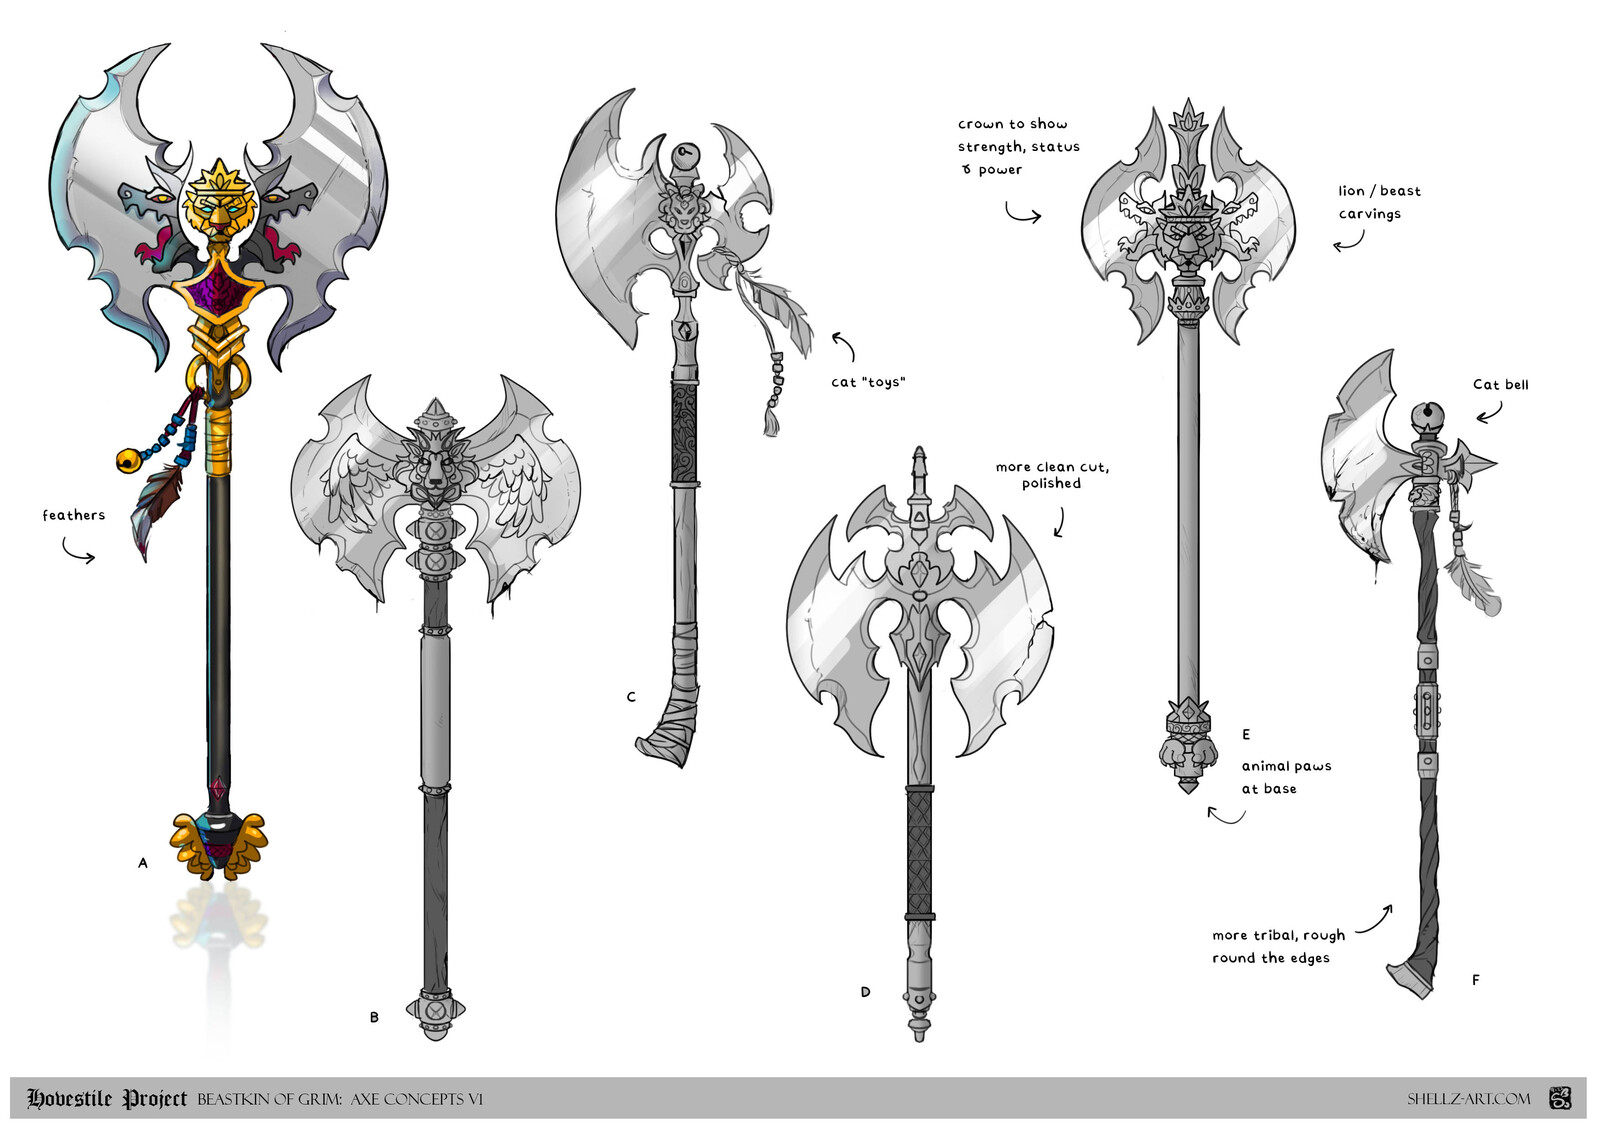 Hovestile Project: Weapon Concepts - Axe